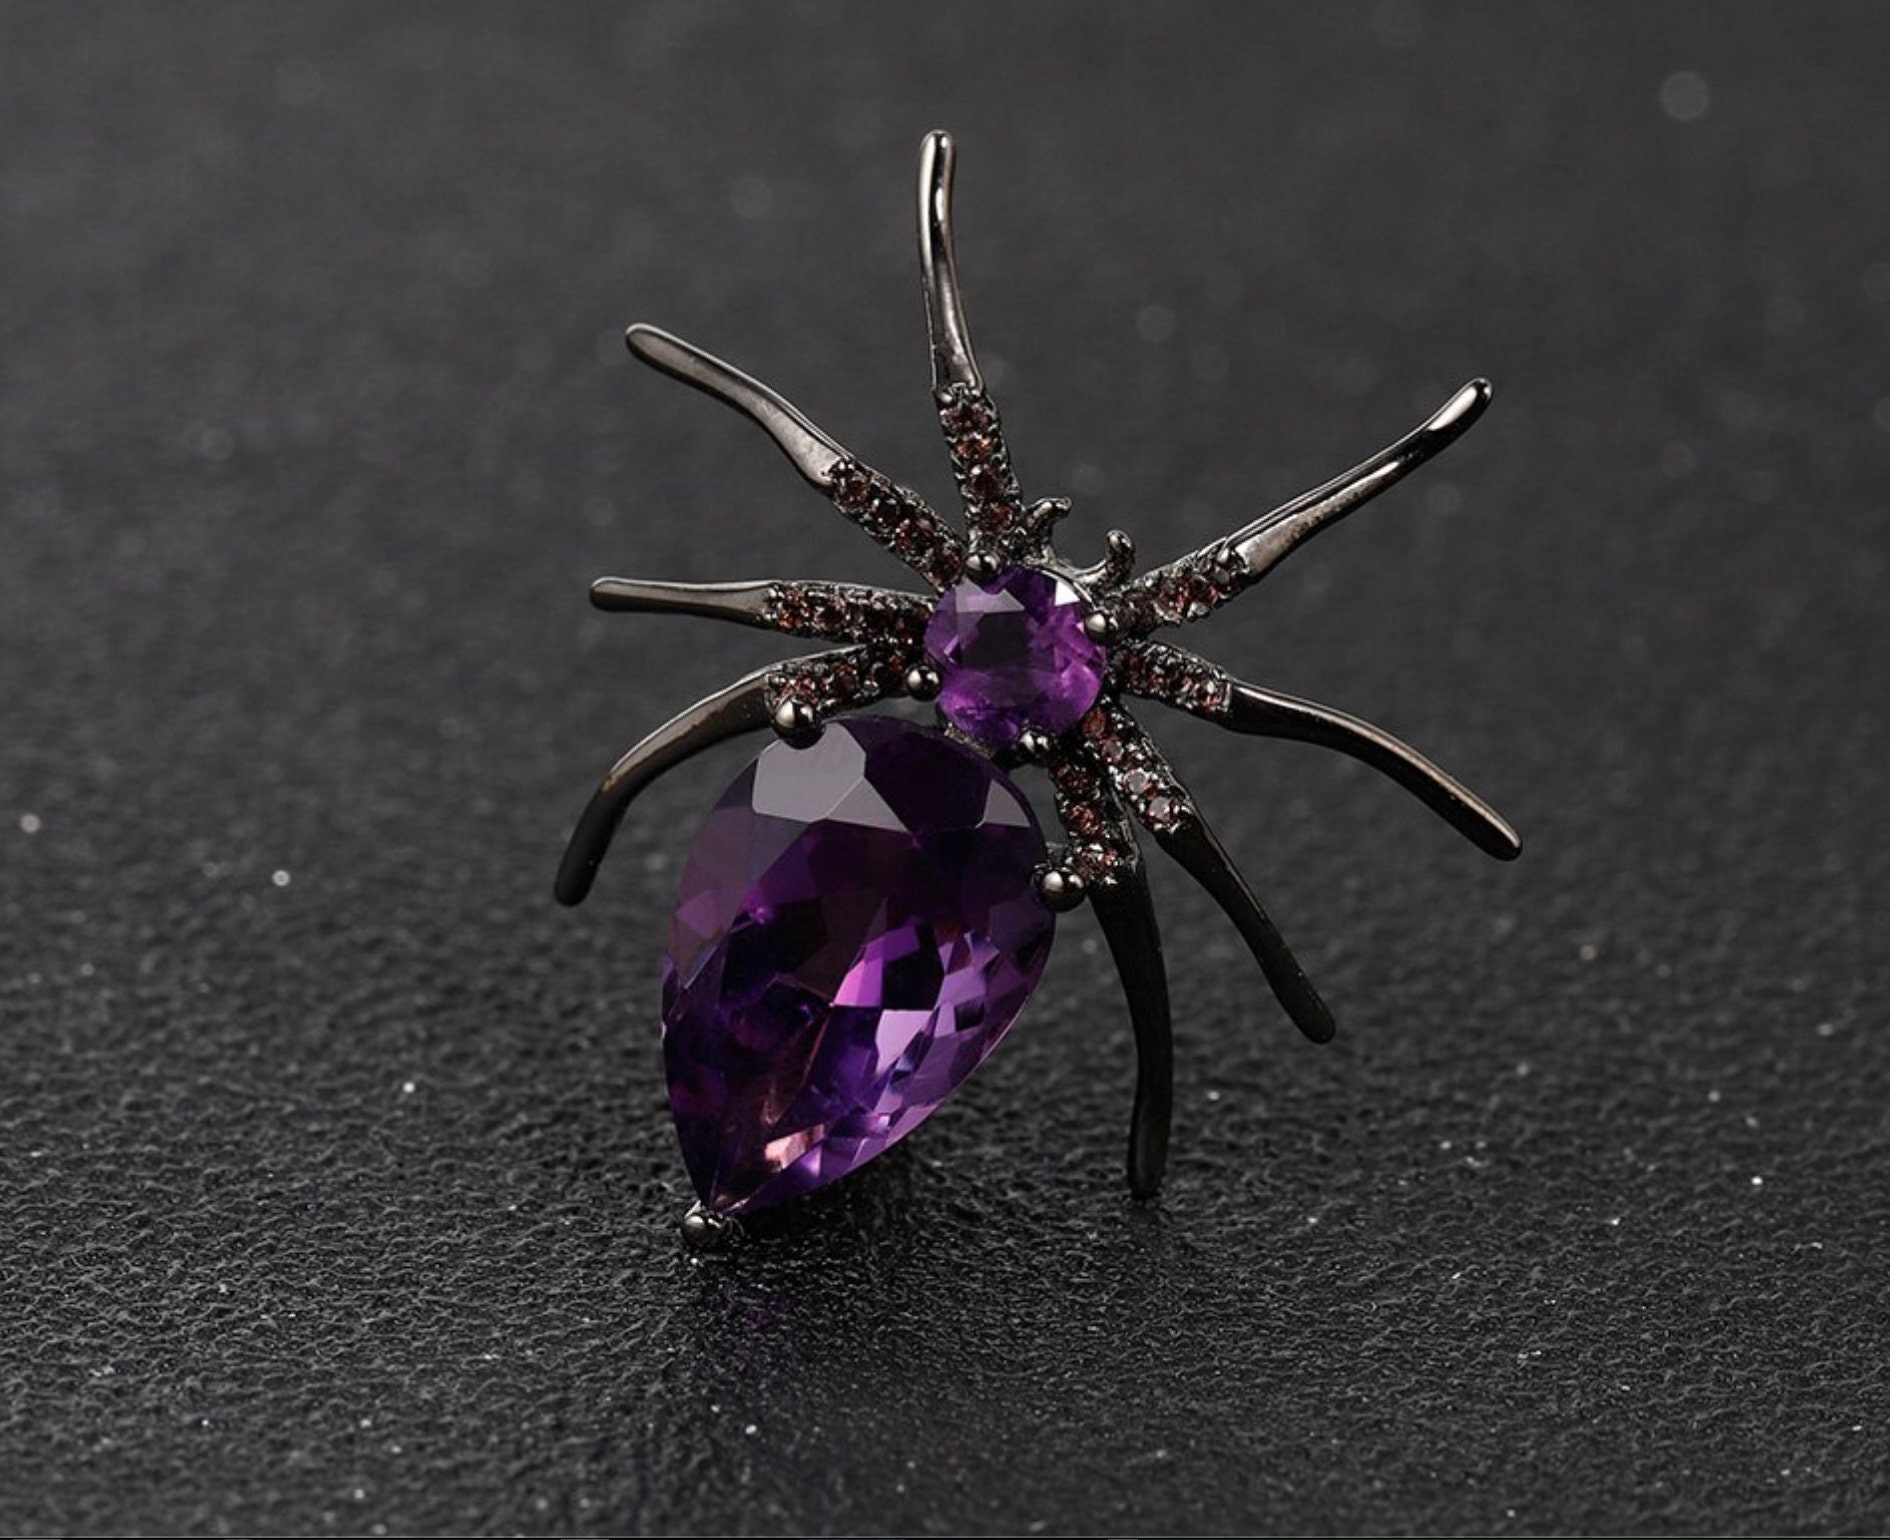 2.40 Ct Round Cut Pearl Fancy Animal Spider Brooch Pin Real 925 Sterling  Silver